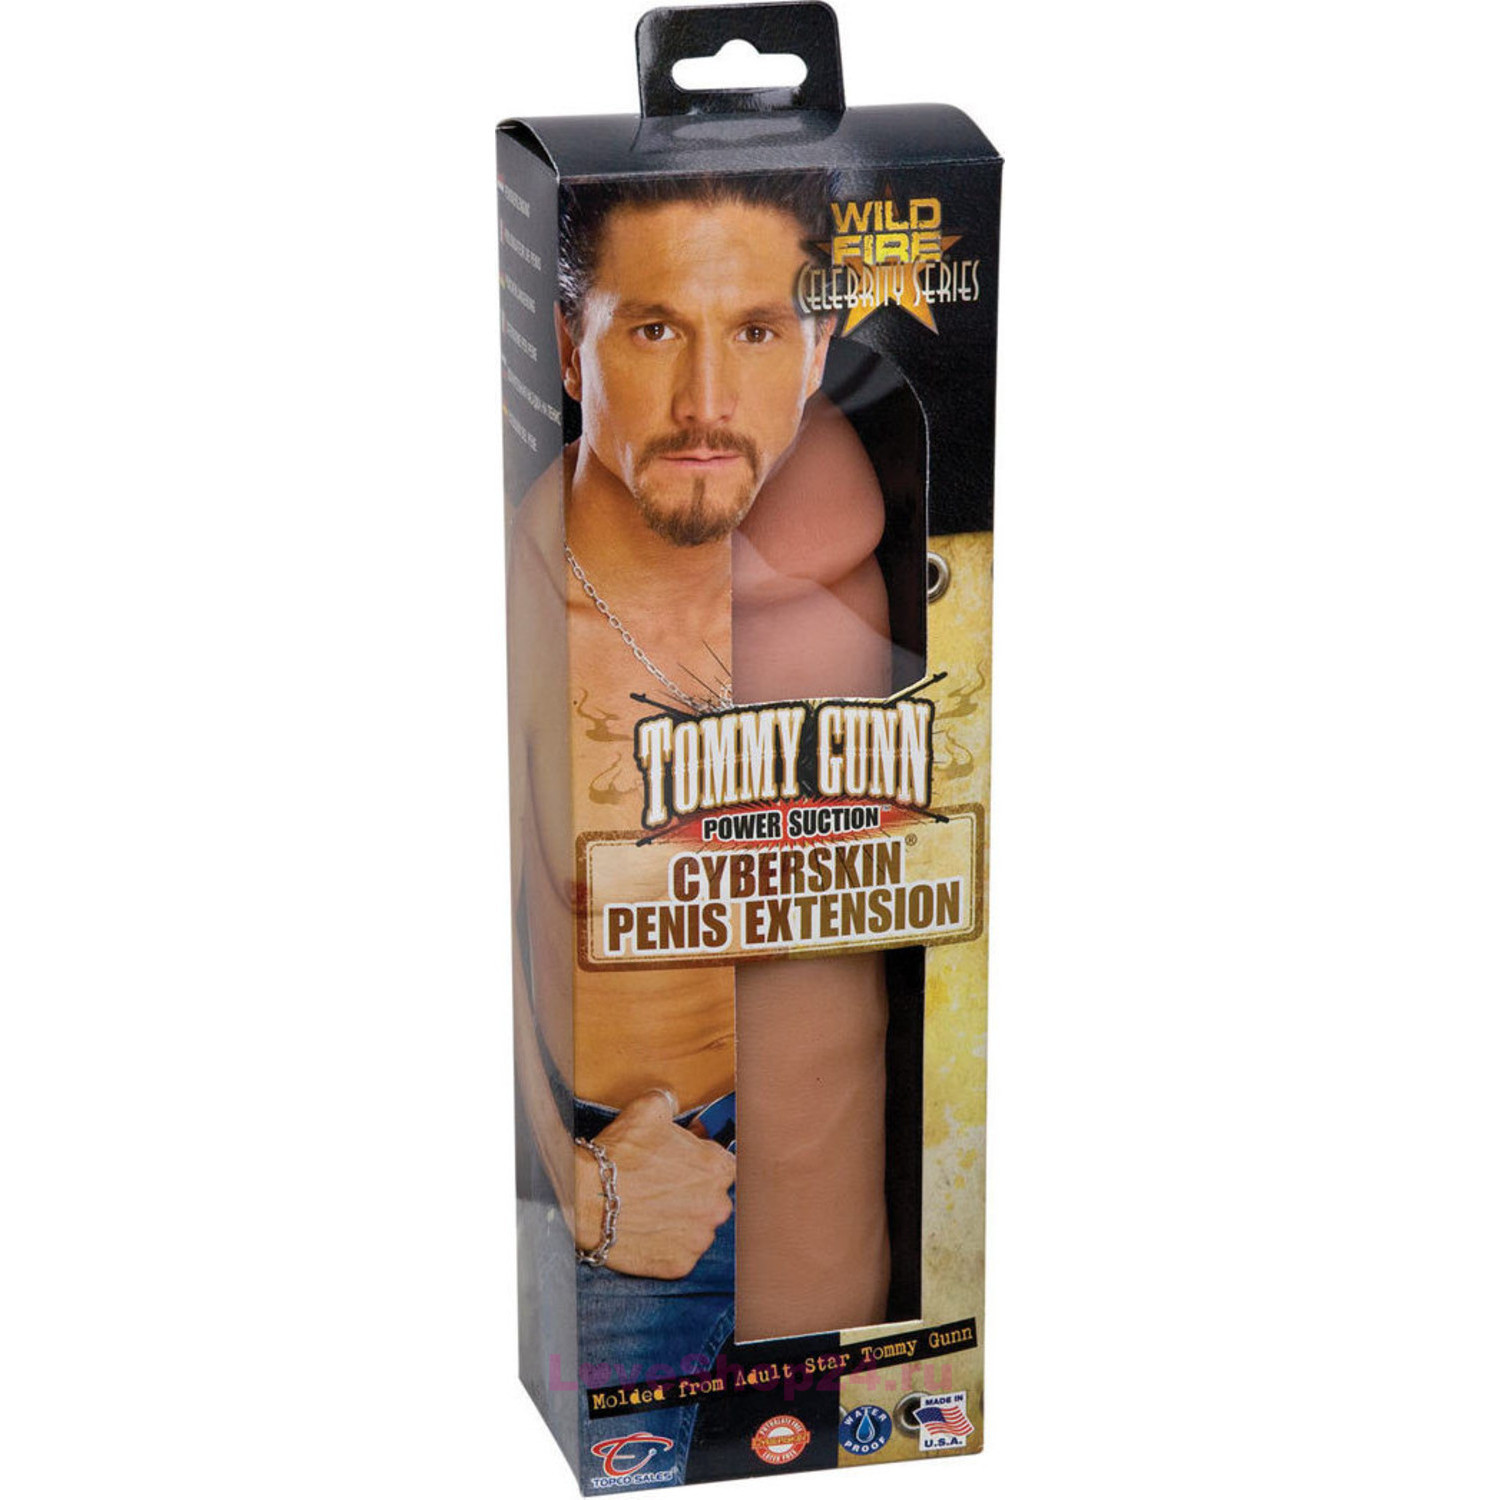     Celebrity Series Tommy Gunn Power Suction Penis Extension, 22.175.2 